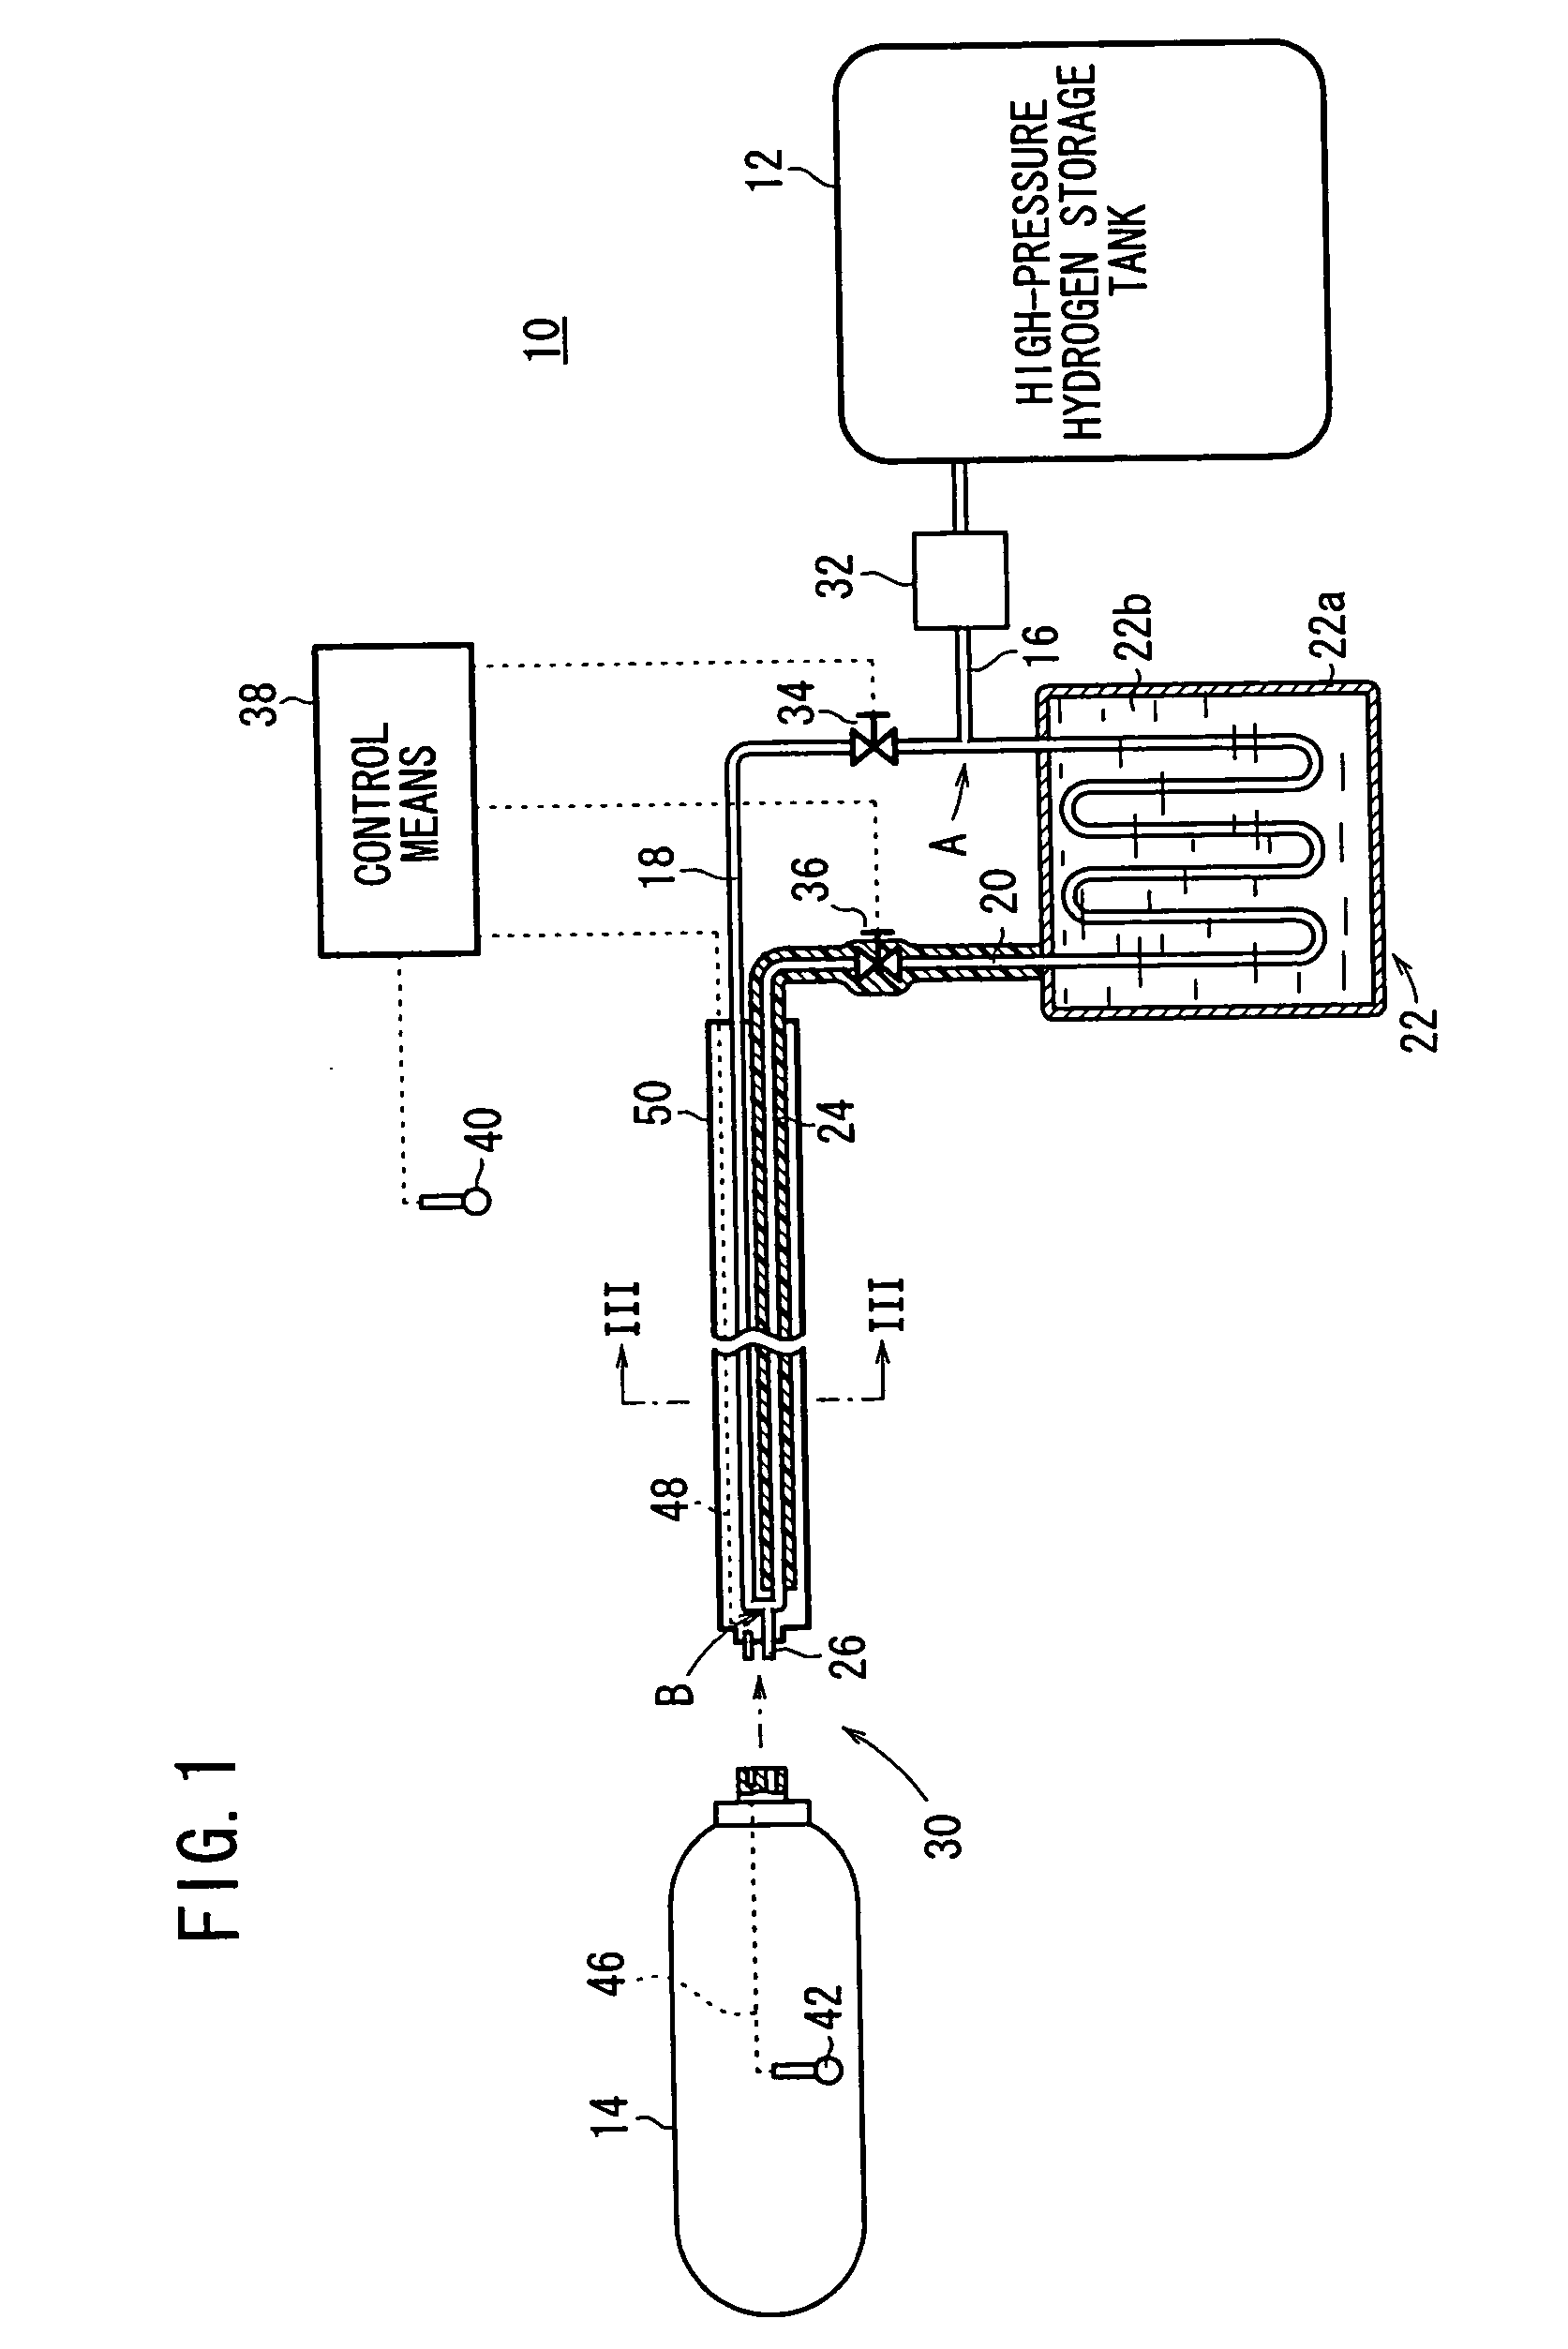 Apparatus for and method of filling hydrogen tank with hydrogen